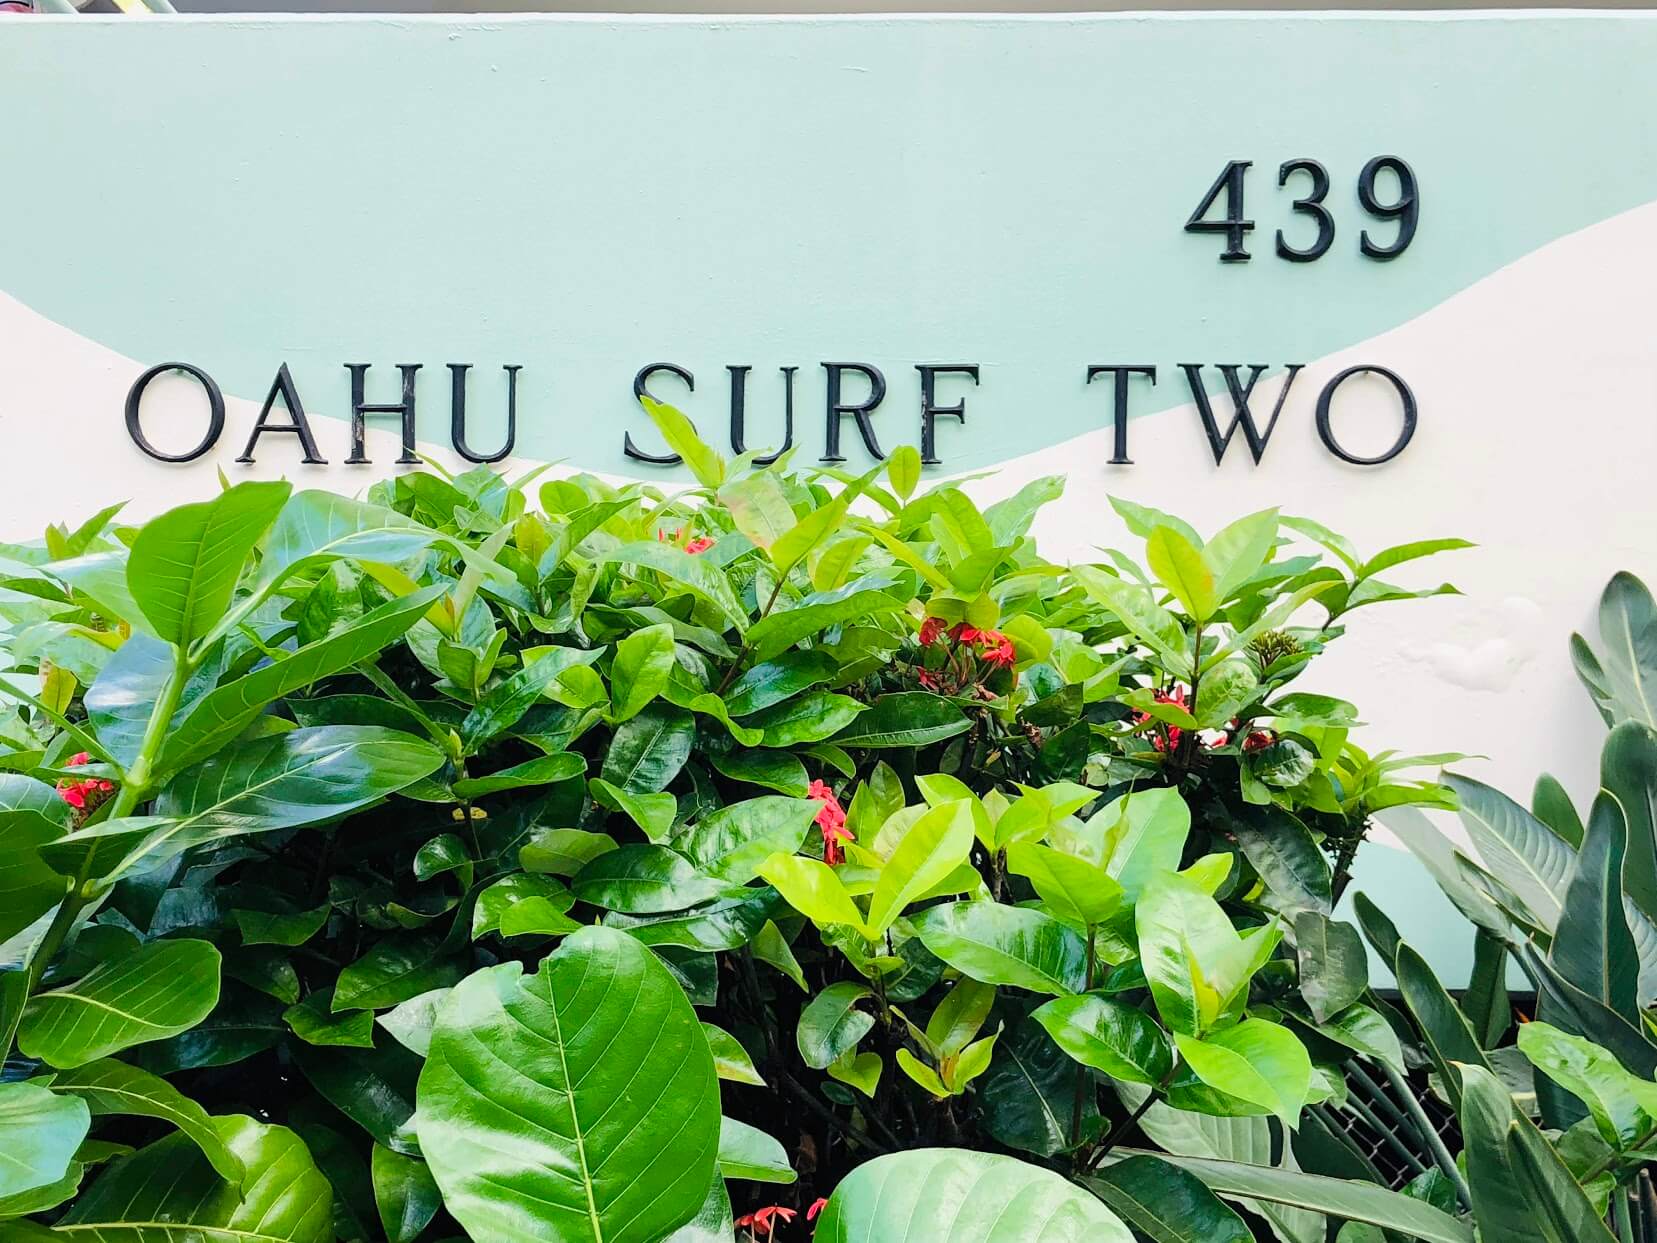 Oahu Surf Twoの看板